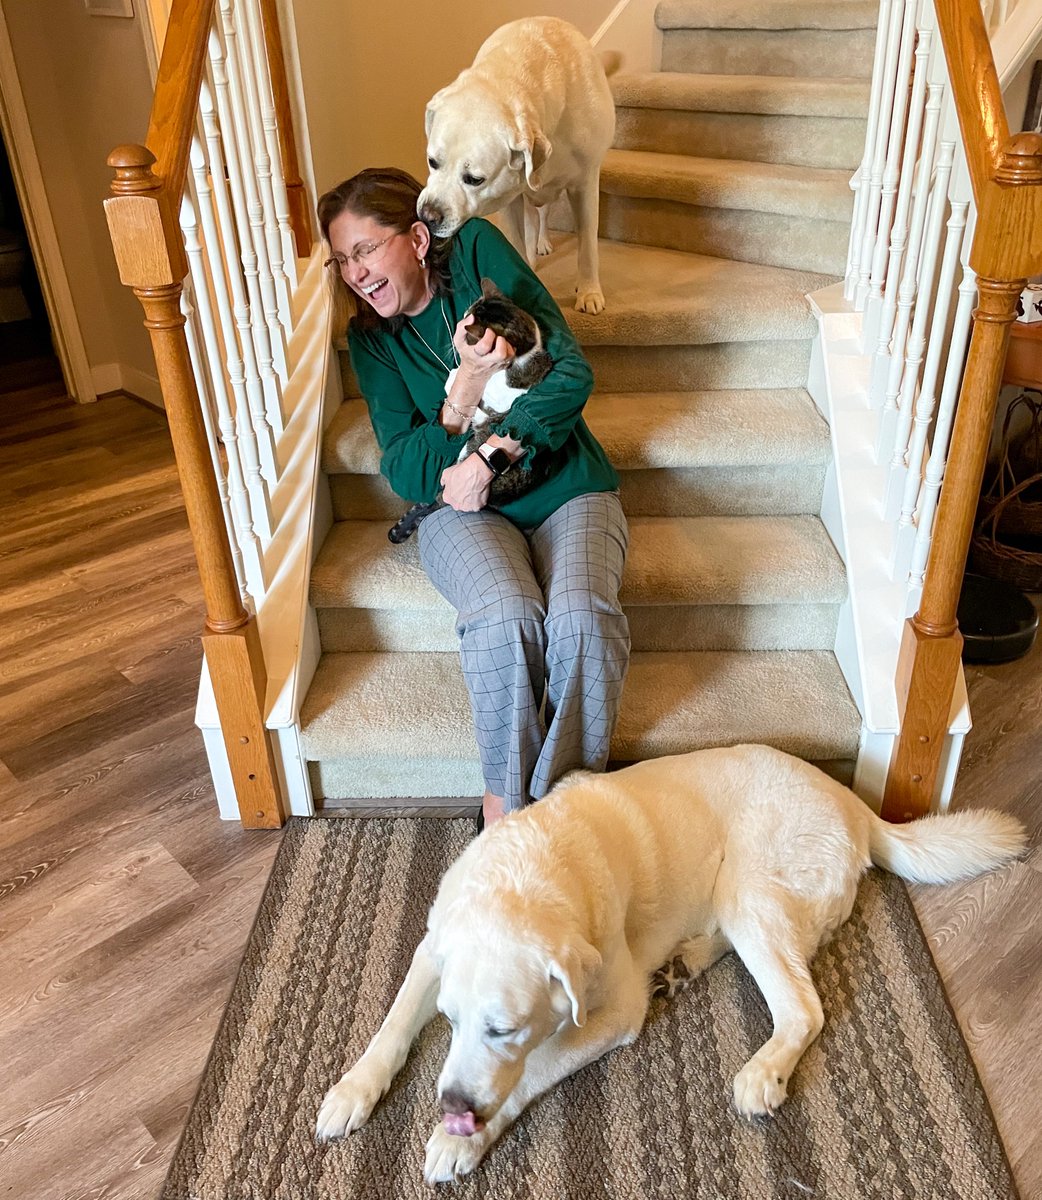 Happy #InternationalDogDay! Celebrating my 2 1/2 dogs — Blitz, the Alpha dog rescue cat, alongside our pawsome English Labs Captain and Buddy. At our house, every day is dog day!🐾 #doglover #dogday